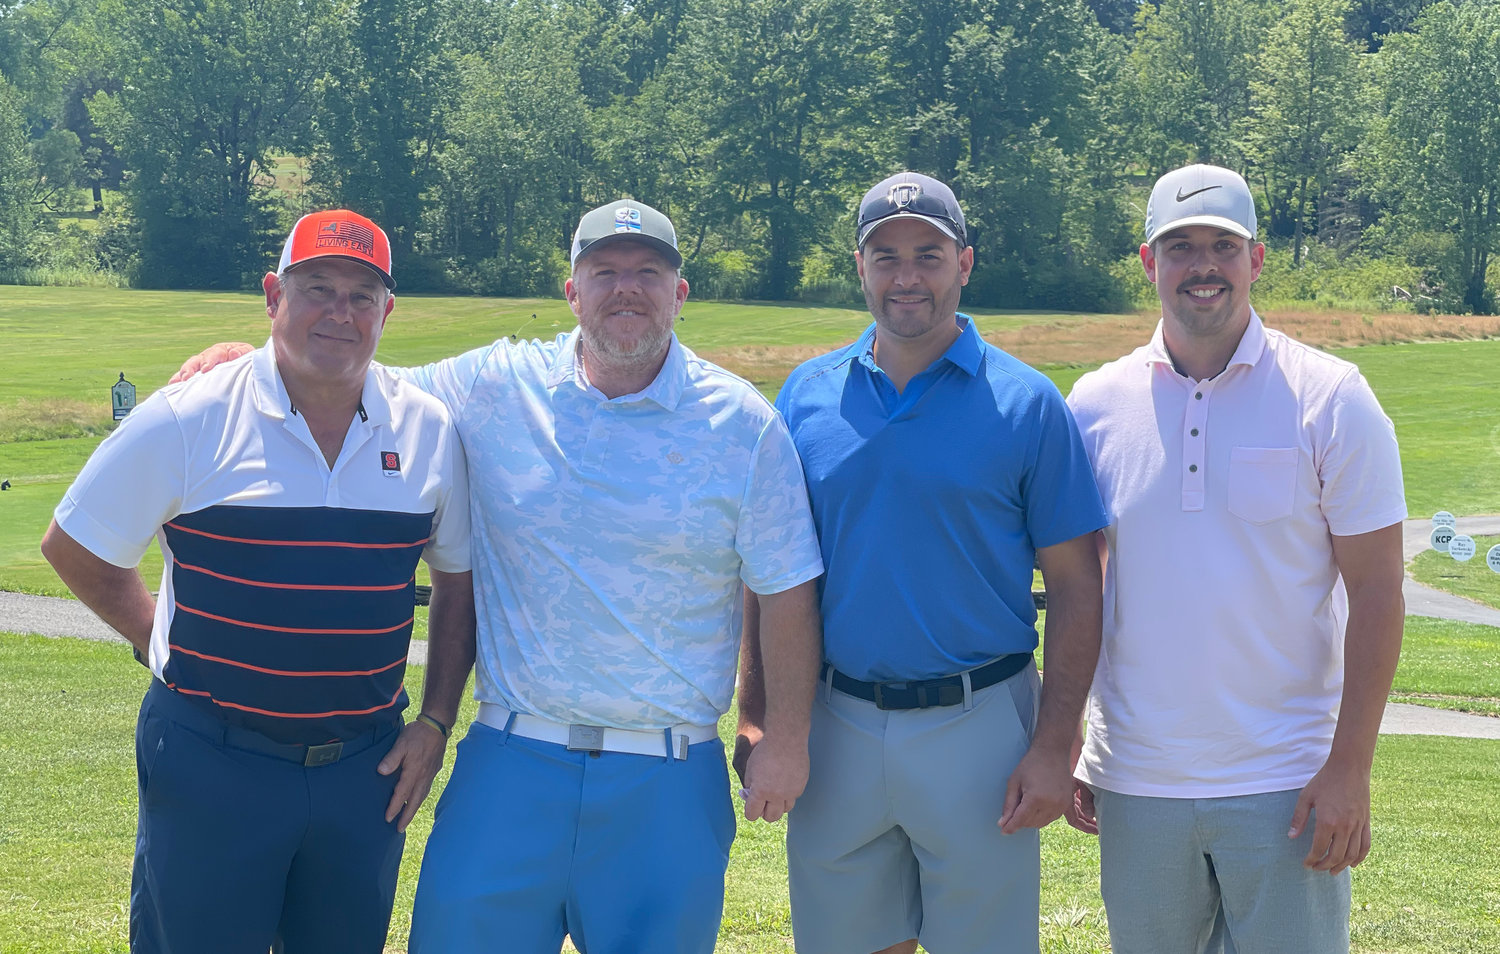 Winning the American Division in the 29th annual Rome Sports Hall of Fame Scramble Golf Tournament on Saturday at Rome Country Club with a score of 59 was Team Korpela consisting of, from left, Jim Korpela, Kevin Coe, Carl Tardugno and Matt Vitalone.